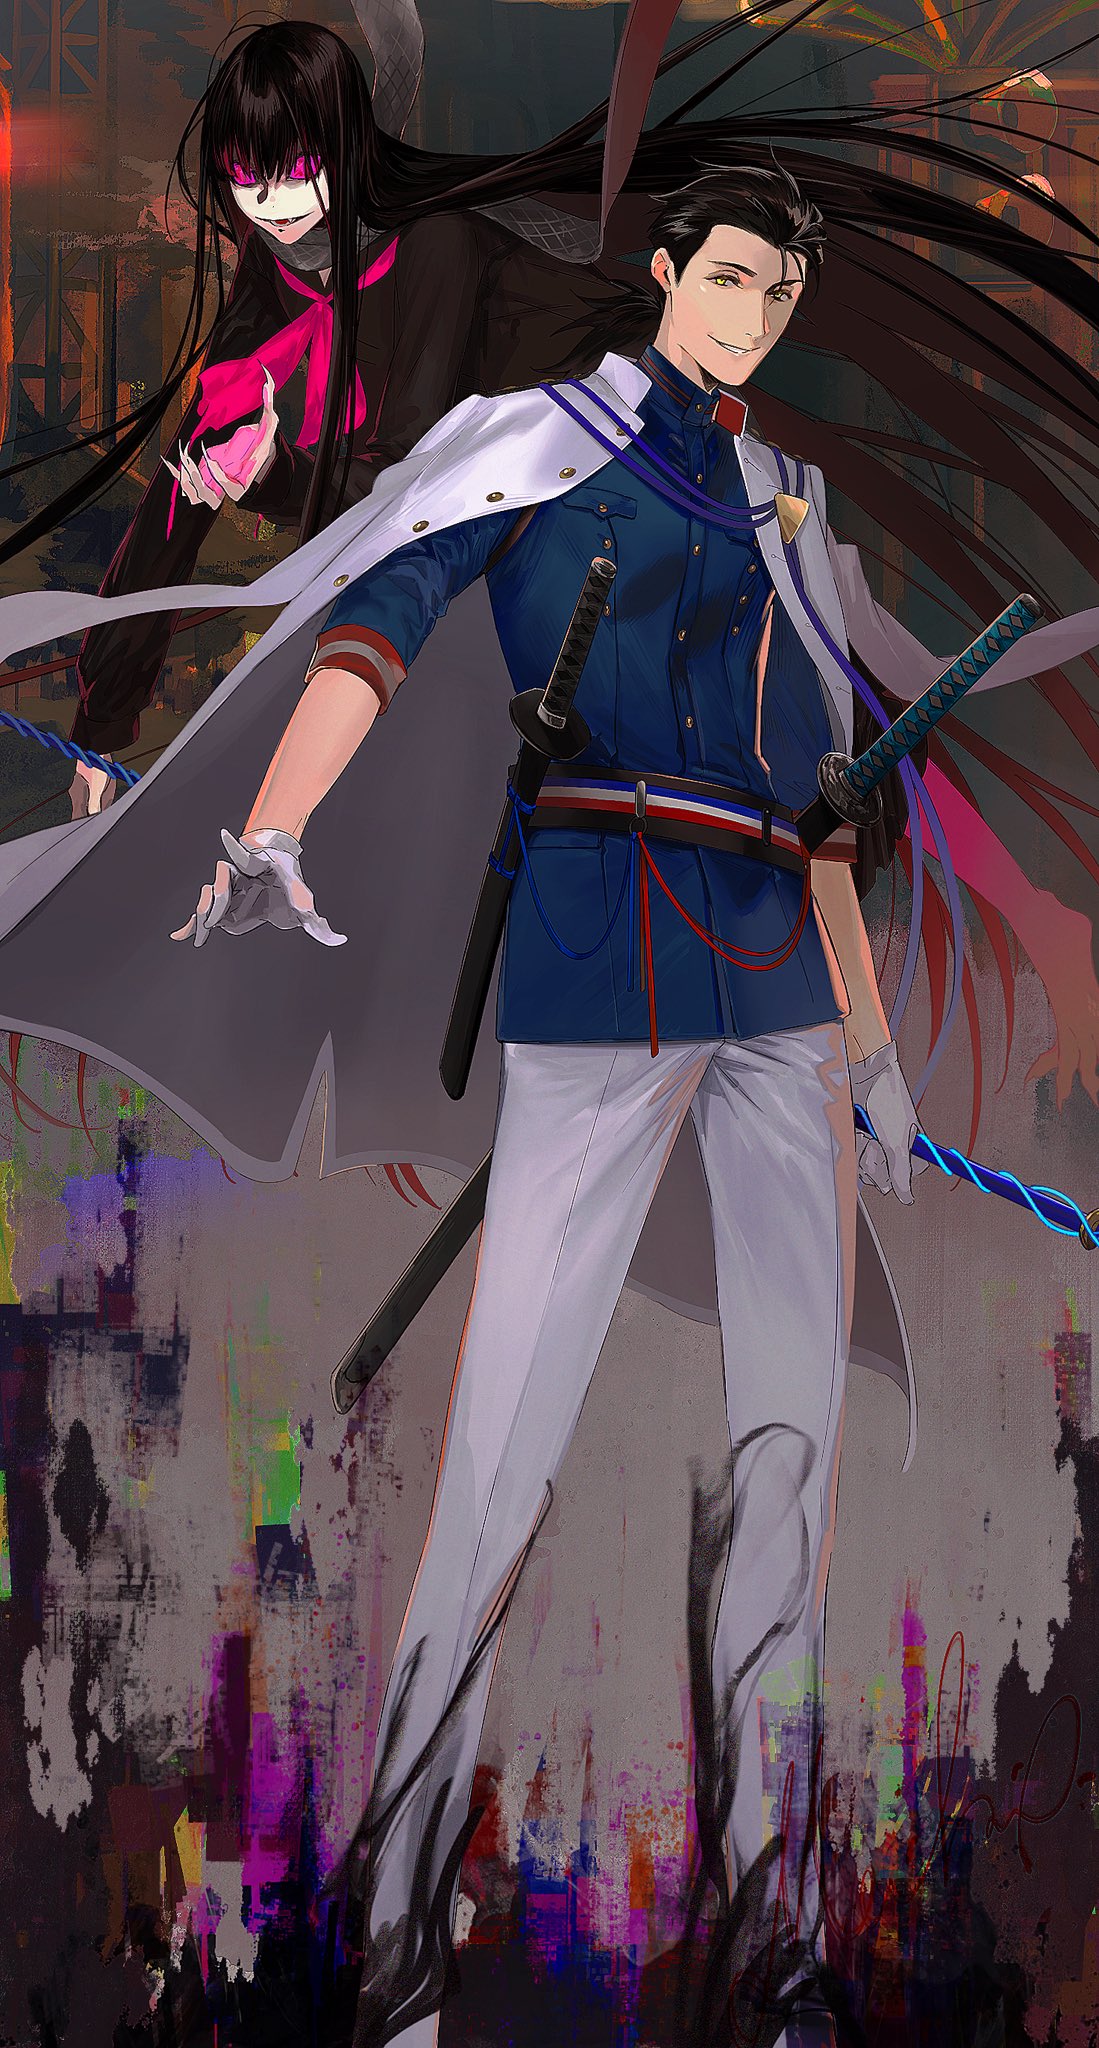 1boy 1girl black_hair black_shirt blue_jacket coat coat_on_shoulders fate/grand_order fate_(series) fingernails gloves grin highres holding holding_weapon jacket long_hair multiple_swords neckerchief open_mouth oryou_(fate) pants pink_neckerchief revision sakamoto_ryouma_(fate) sharp_fingernails shirt short_hair smile very_long_hair weapon white_coat white_gloves white_pants yellow_eyes ziege113